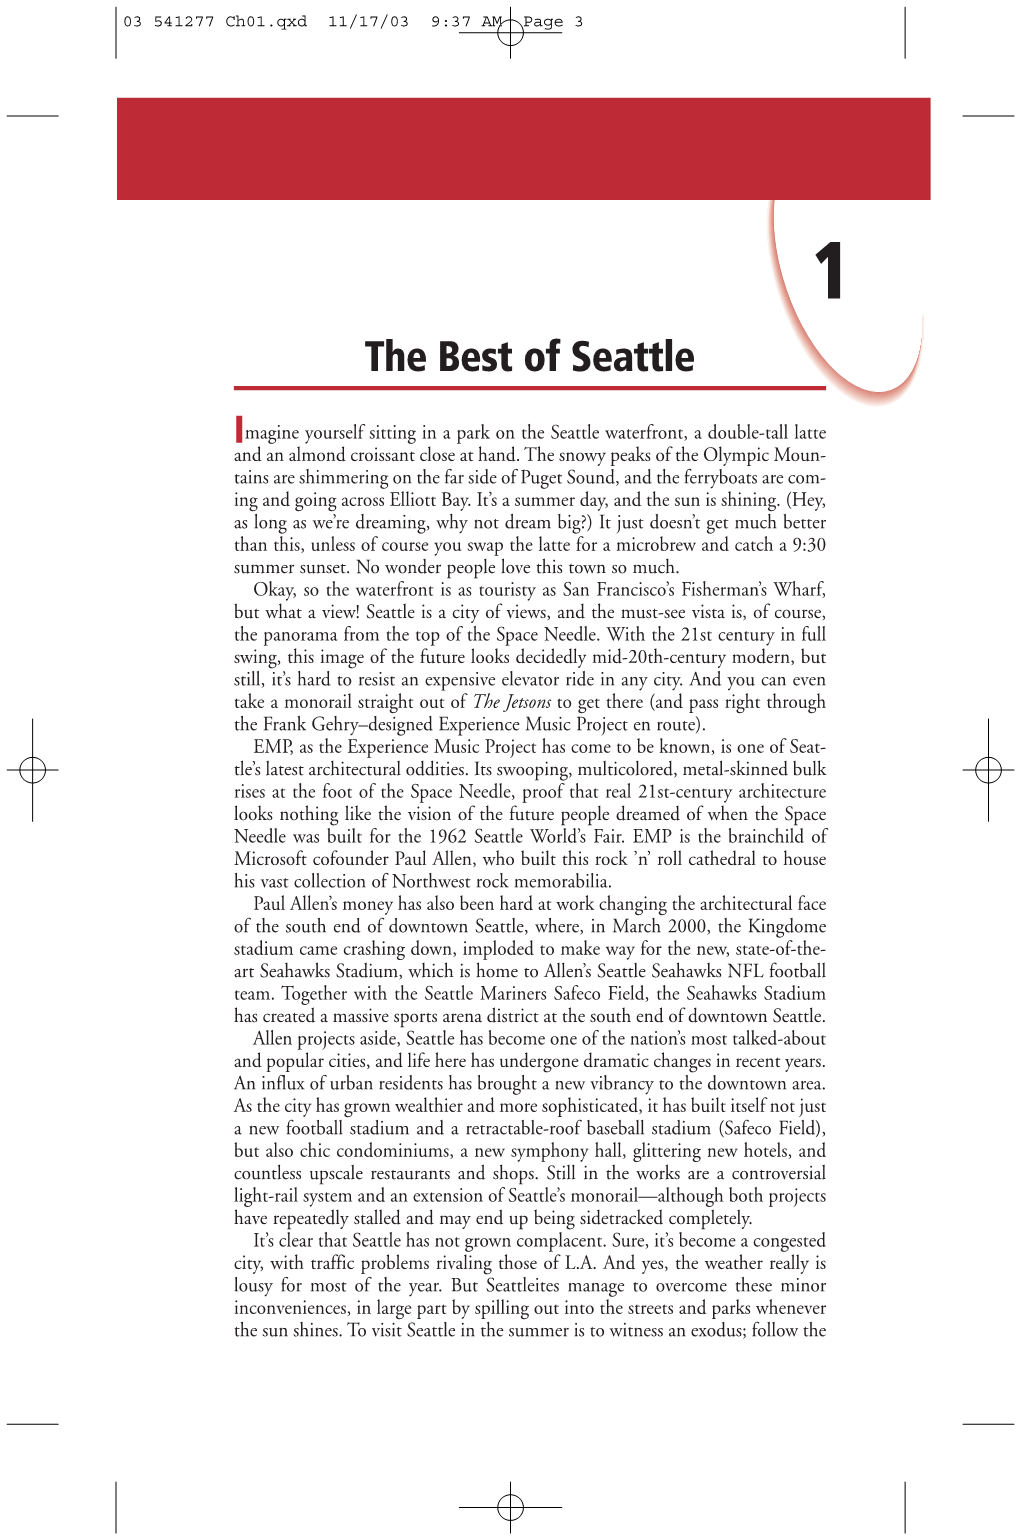 The Best of Seattle